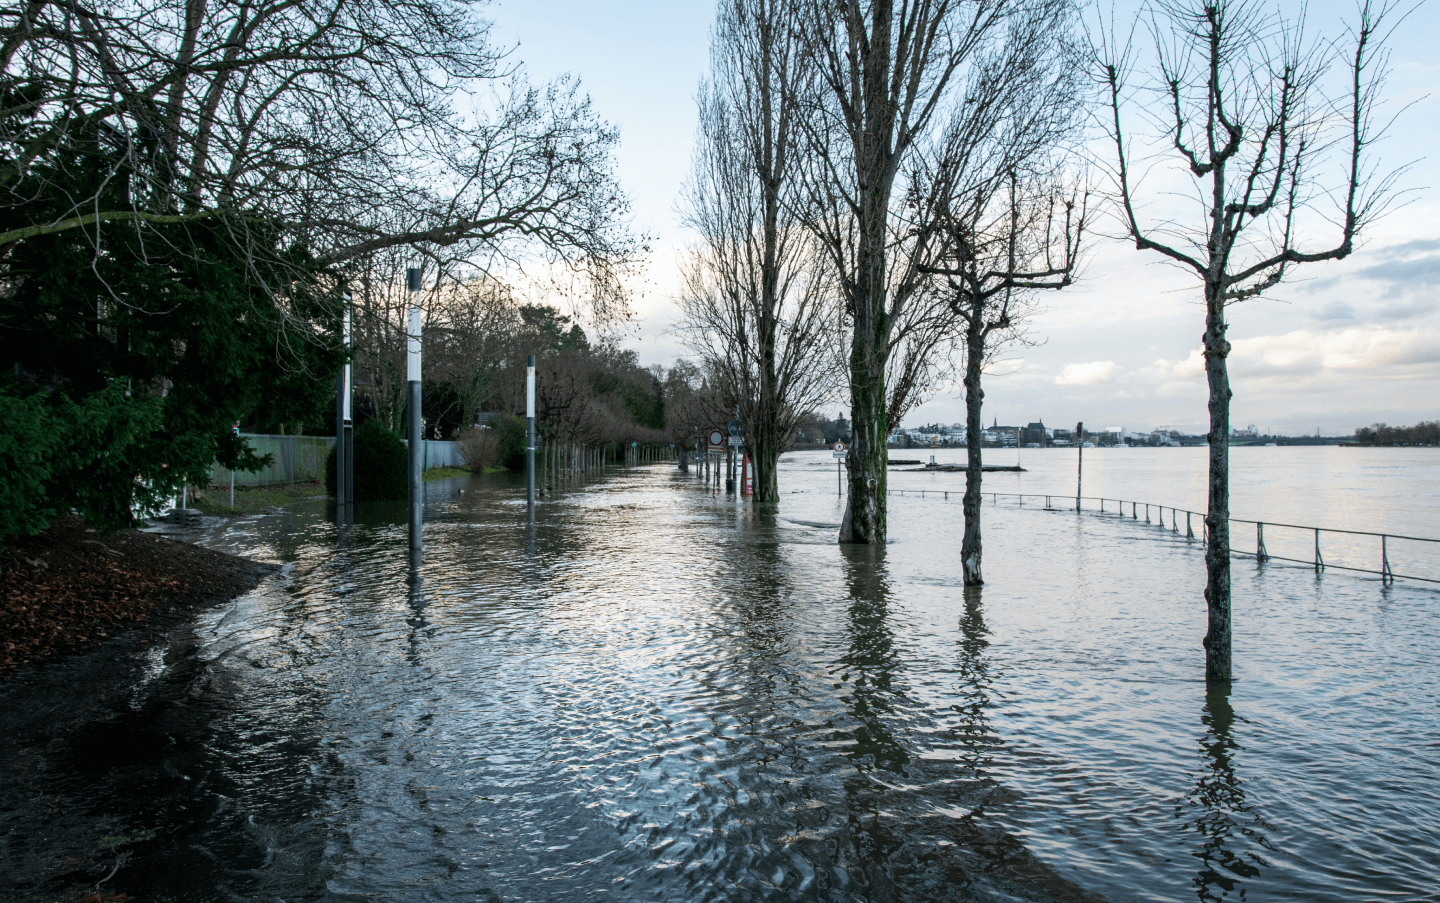 Background Image: a flooded city